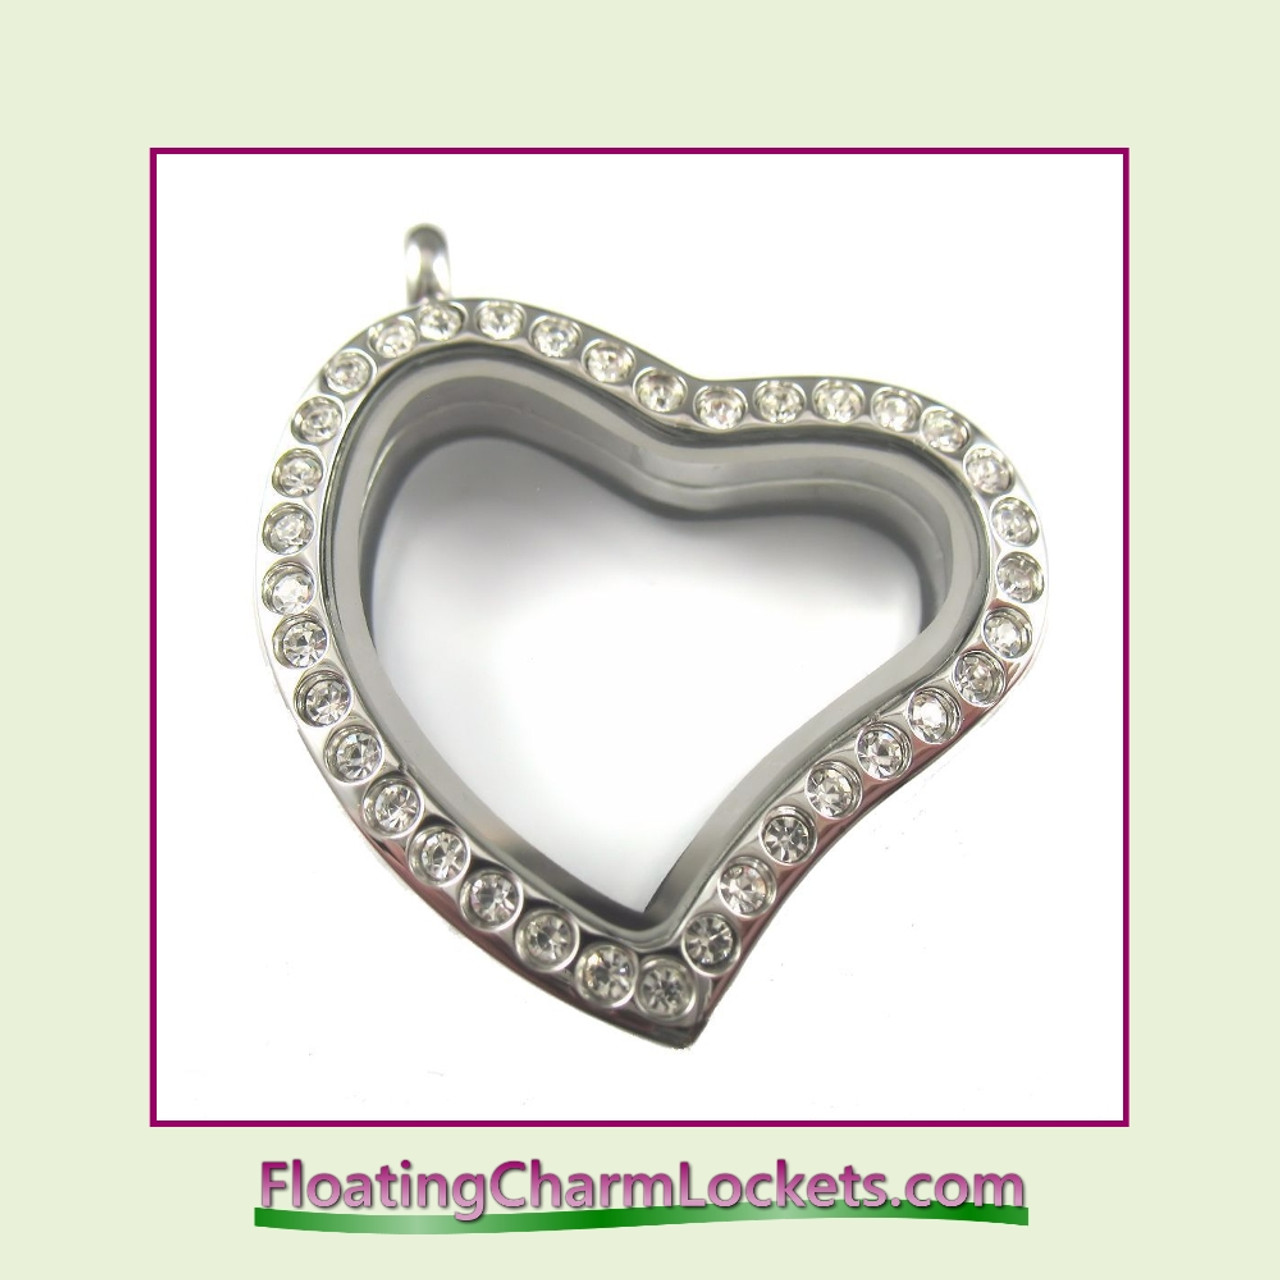 CZ Silver Curved Heart Stainless Steel Floating Charm Locket